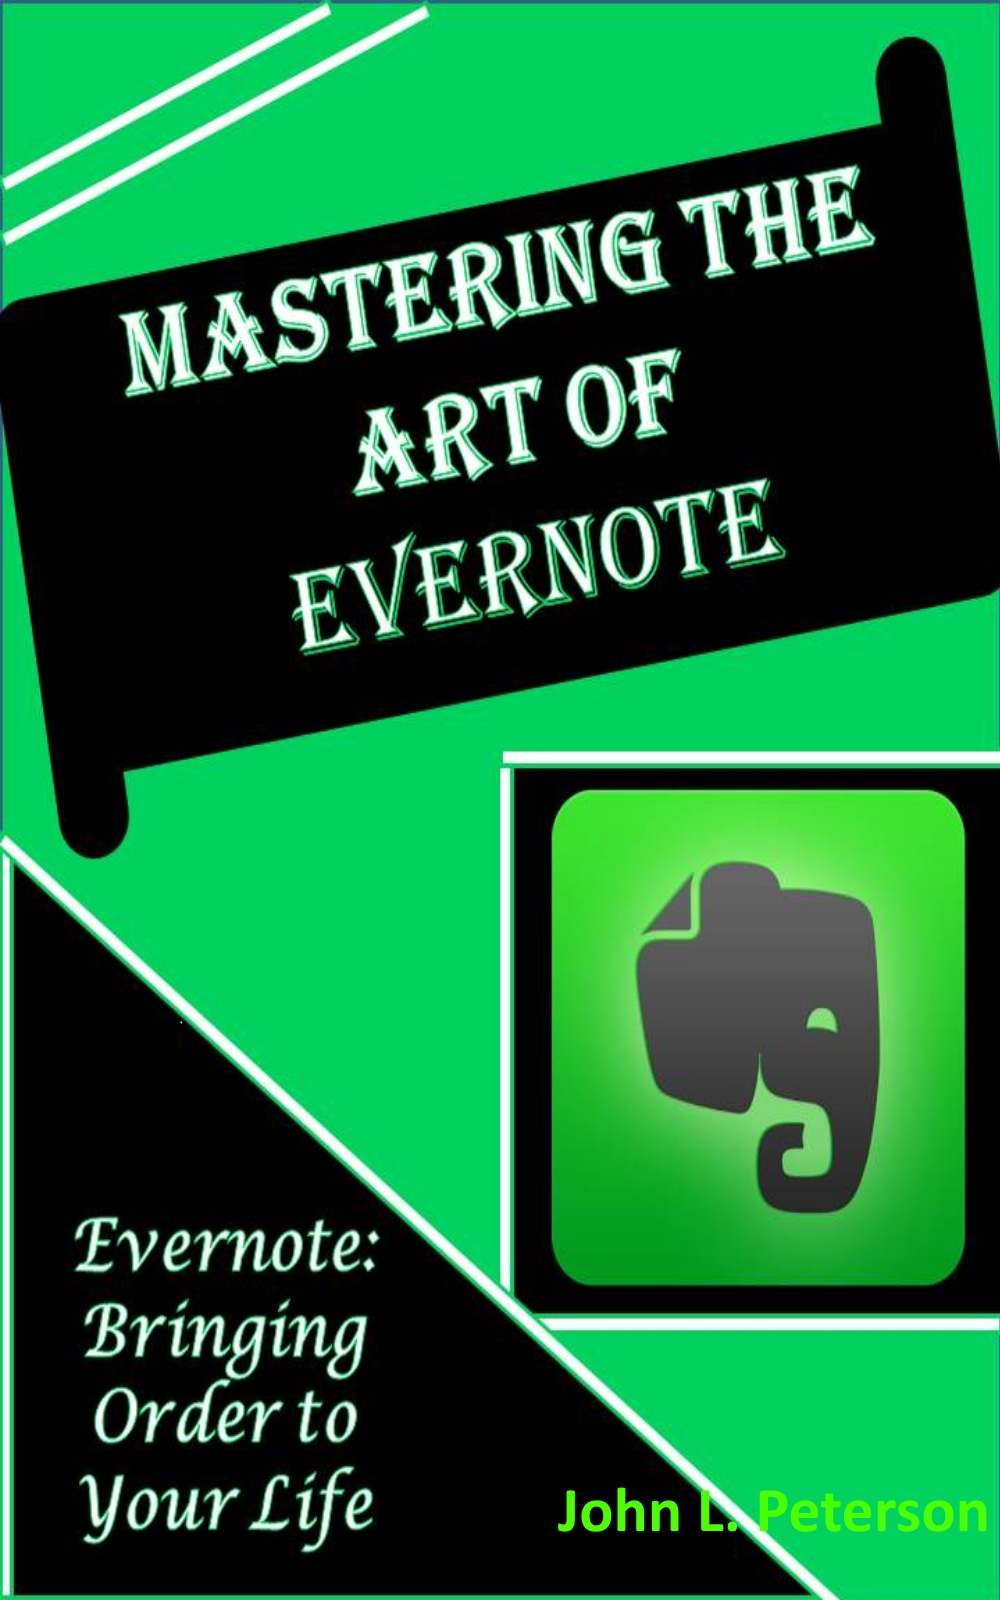 Mastering the Art of Evernote: Evernote-Bringing Order to Your Personal & Professional Life by John L. Peterson